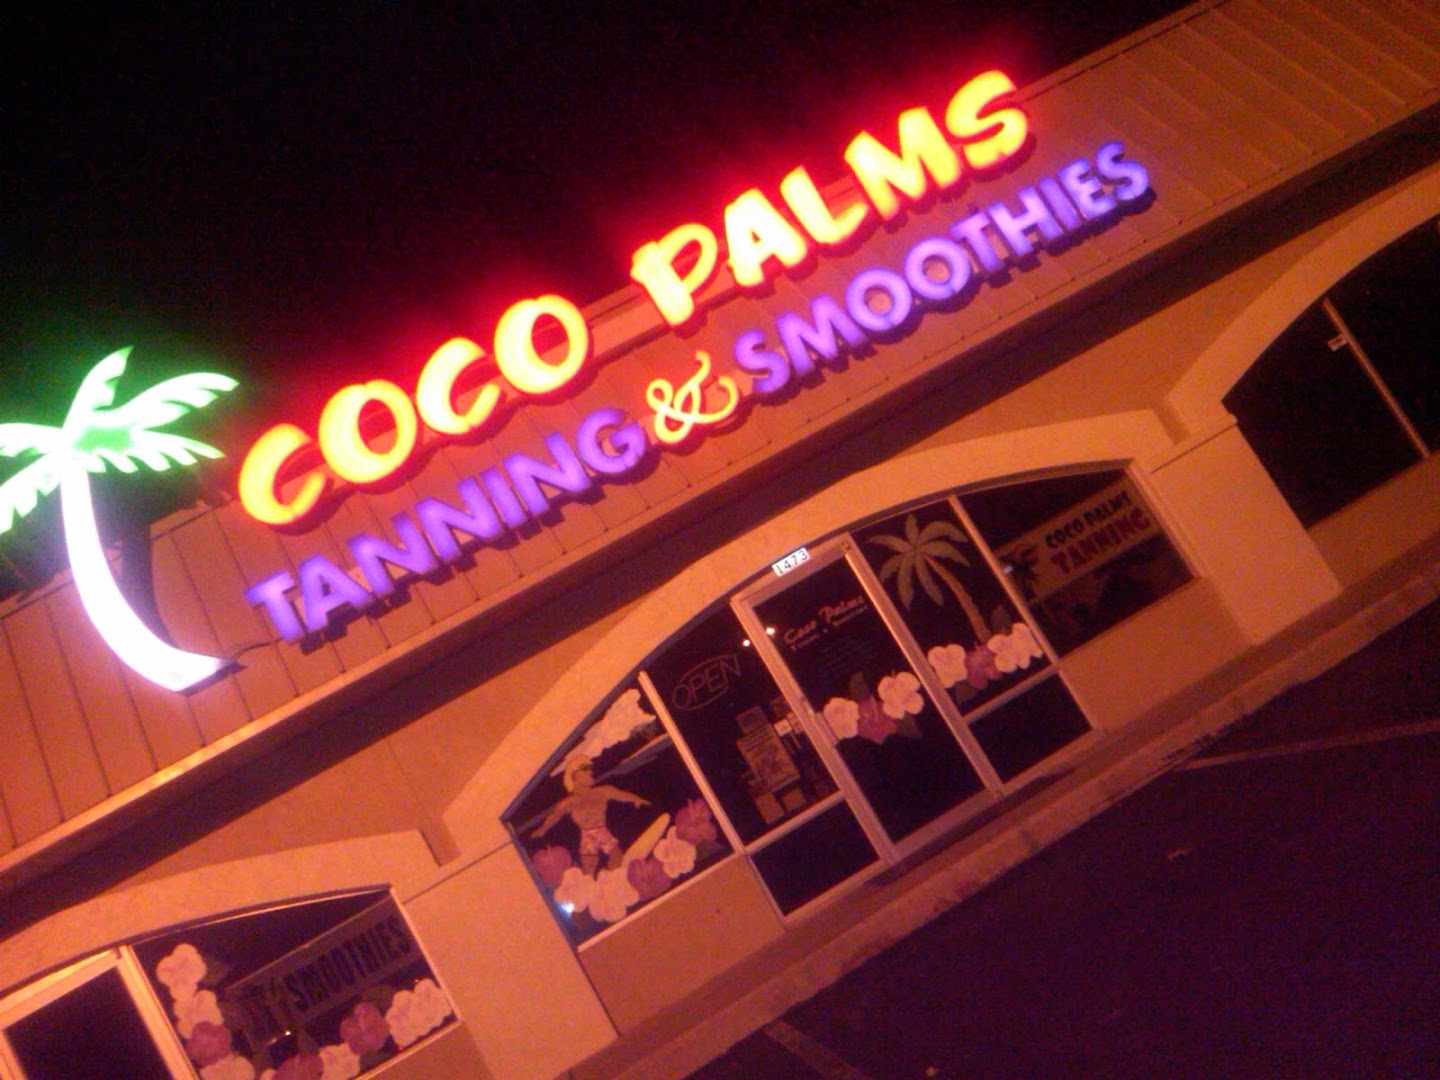 Coco Palms Tanning & Smoothies